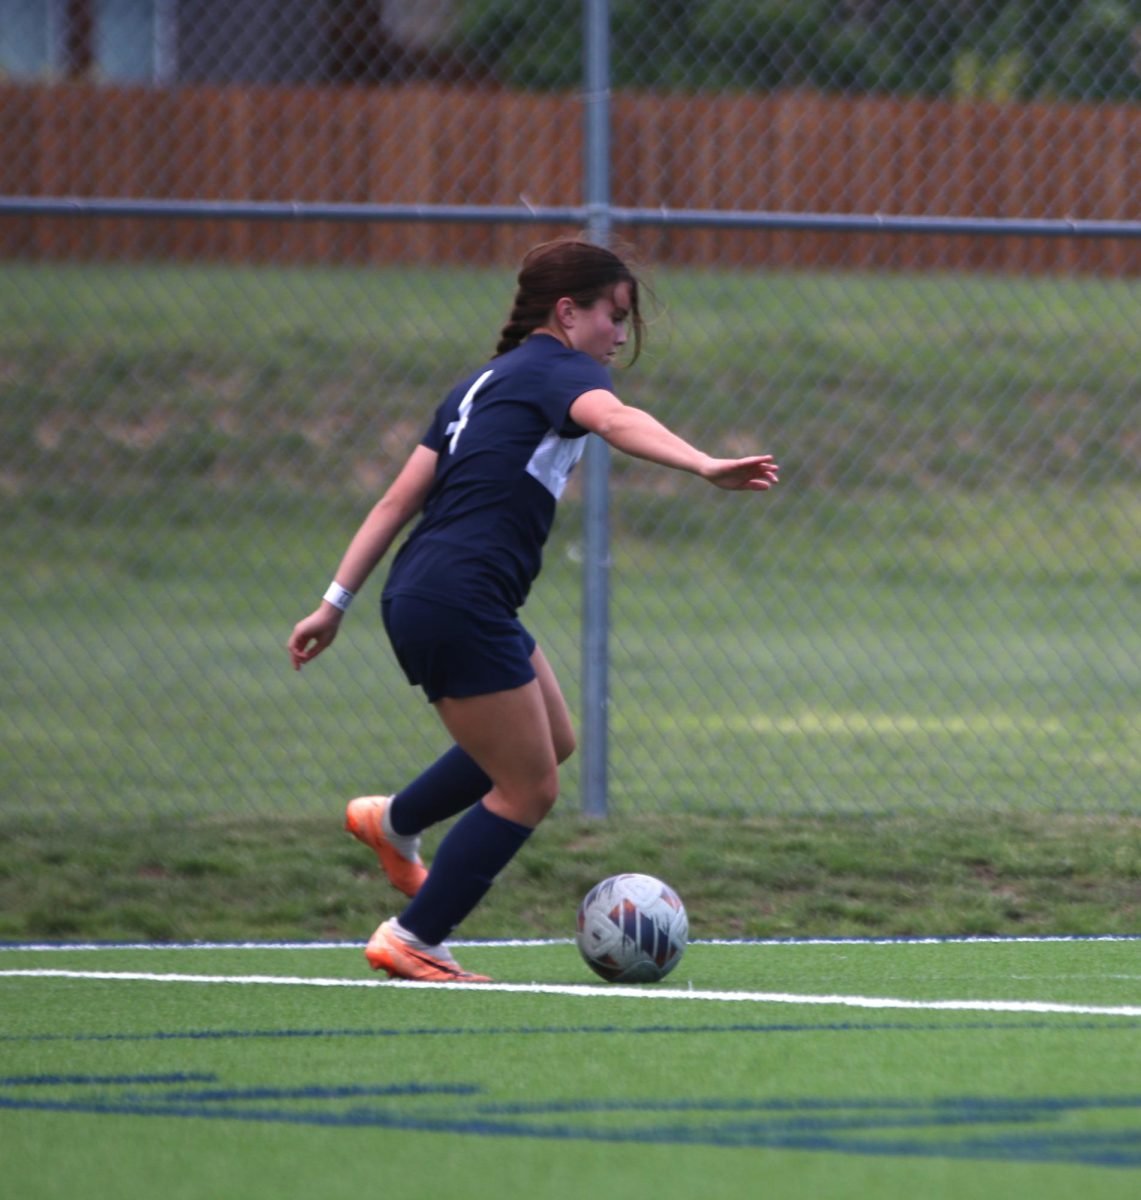 Preparing to kick the ball, junior Lauren Welch looks out into the field for an open teammate.